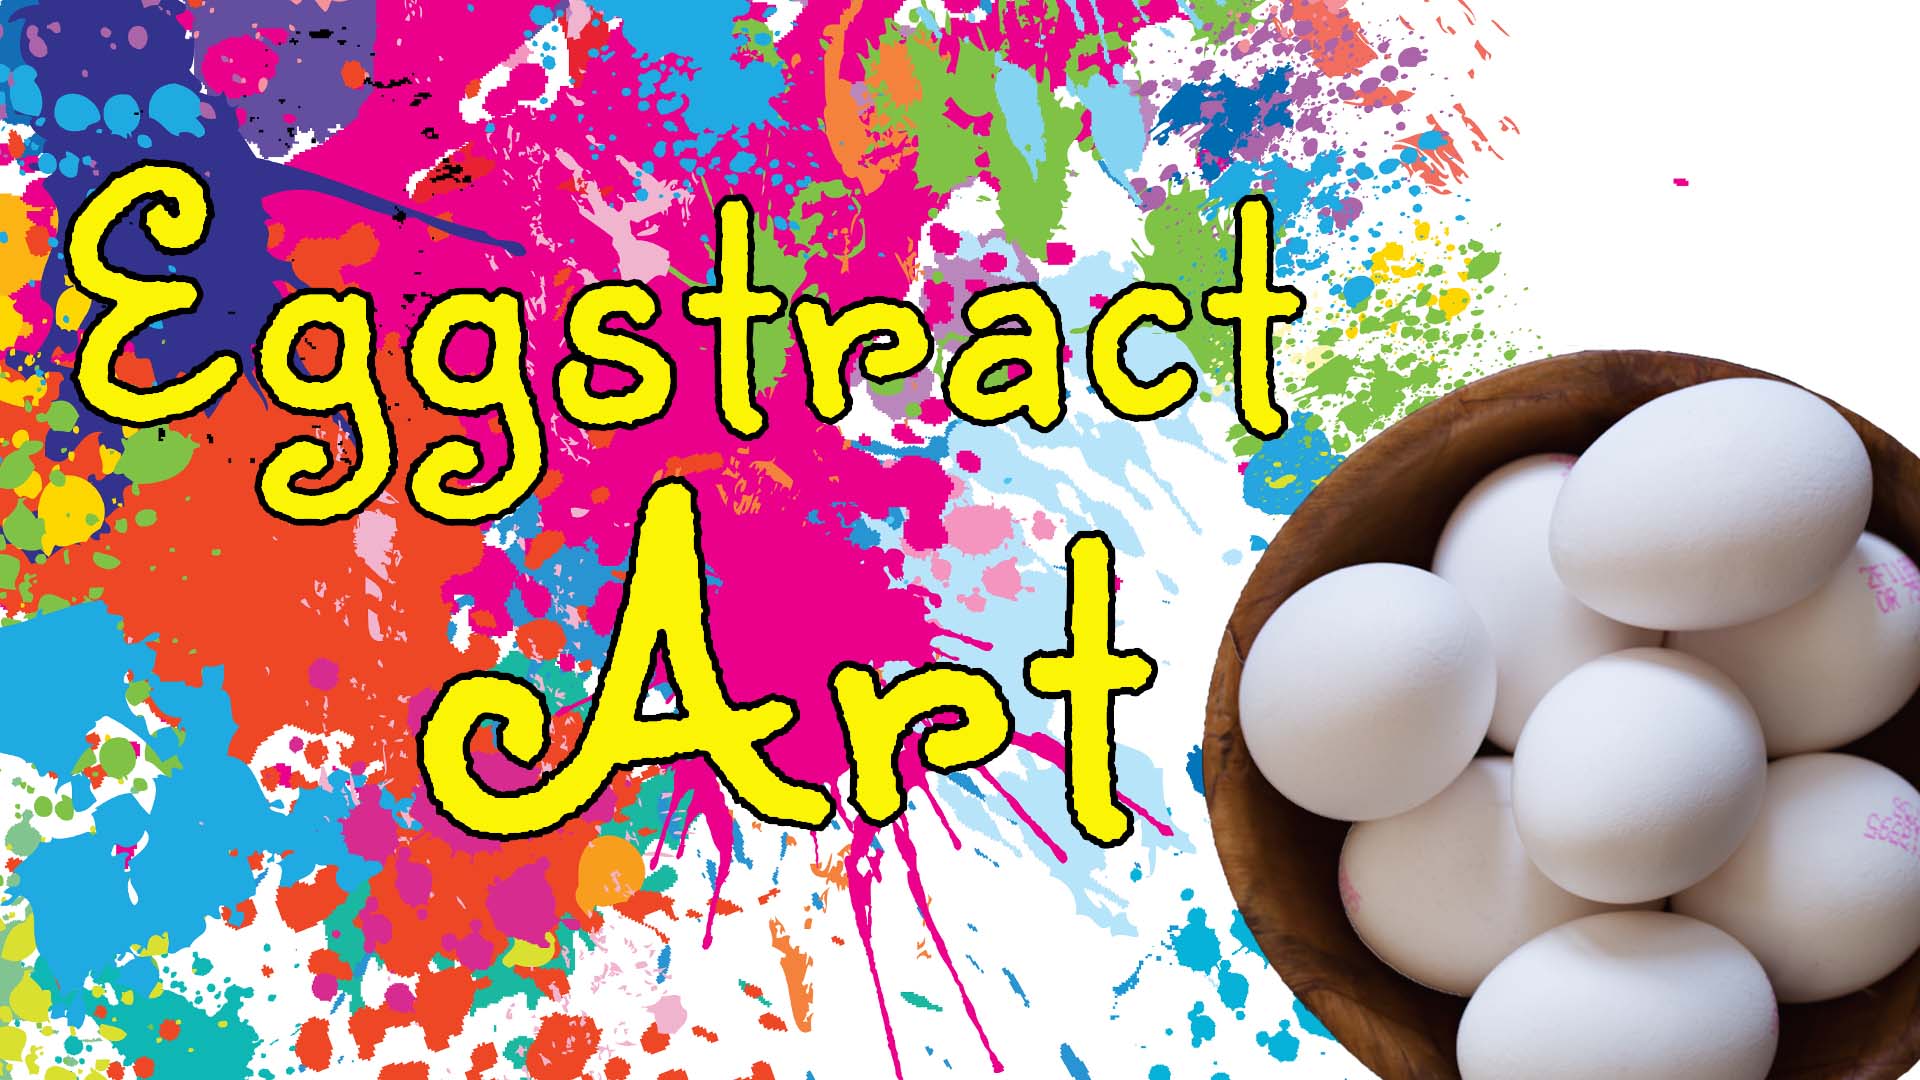 Image text read "Eggstract Art" in a curly yellow font in front of brightly colored paint splotches of aqua, magental, orange, and violet. A basket of white eggs is in the bottom-right corner.